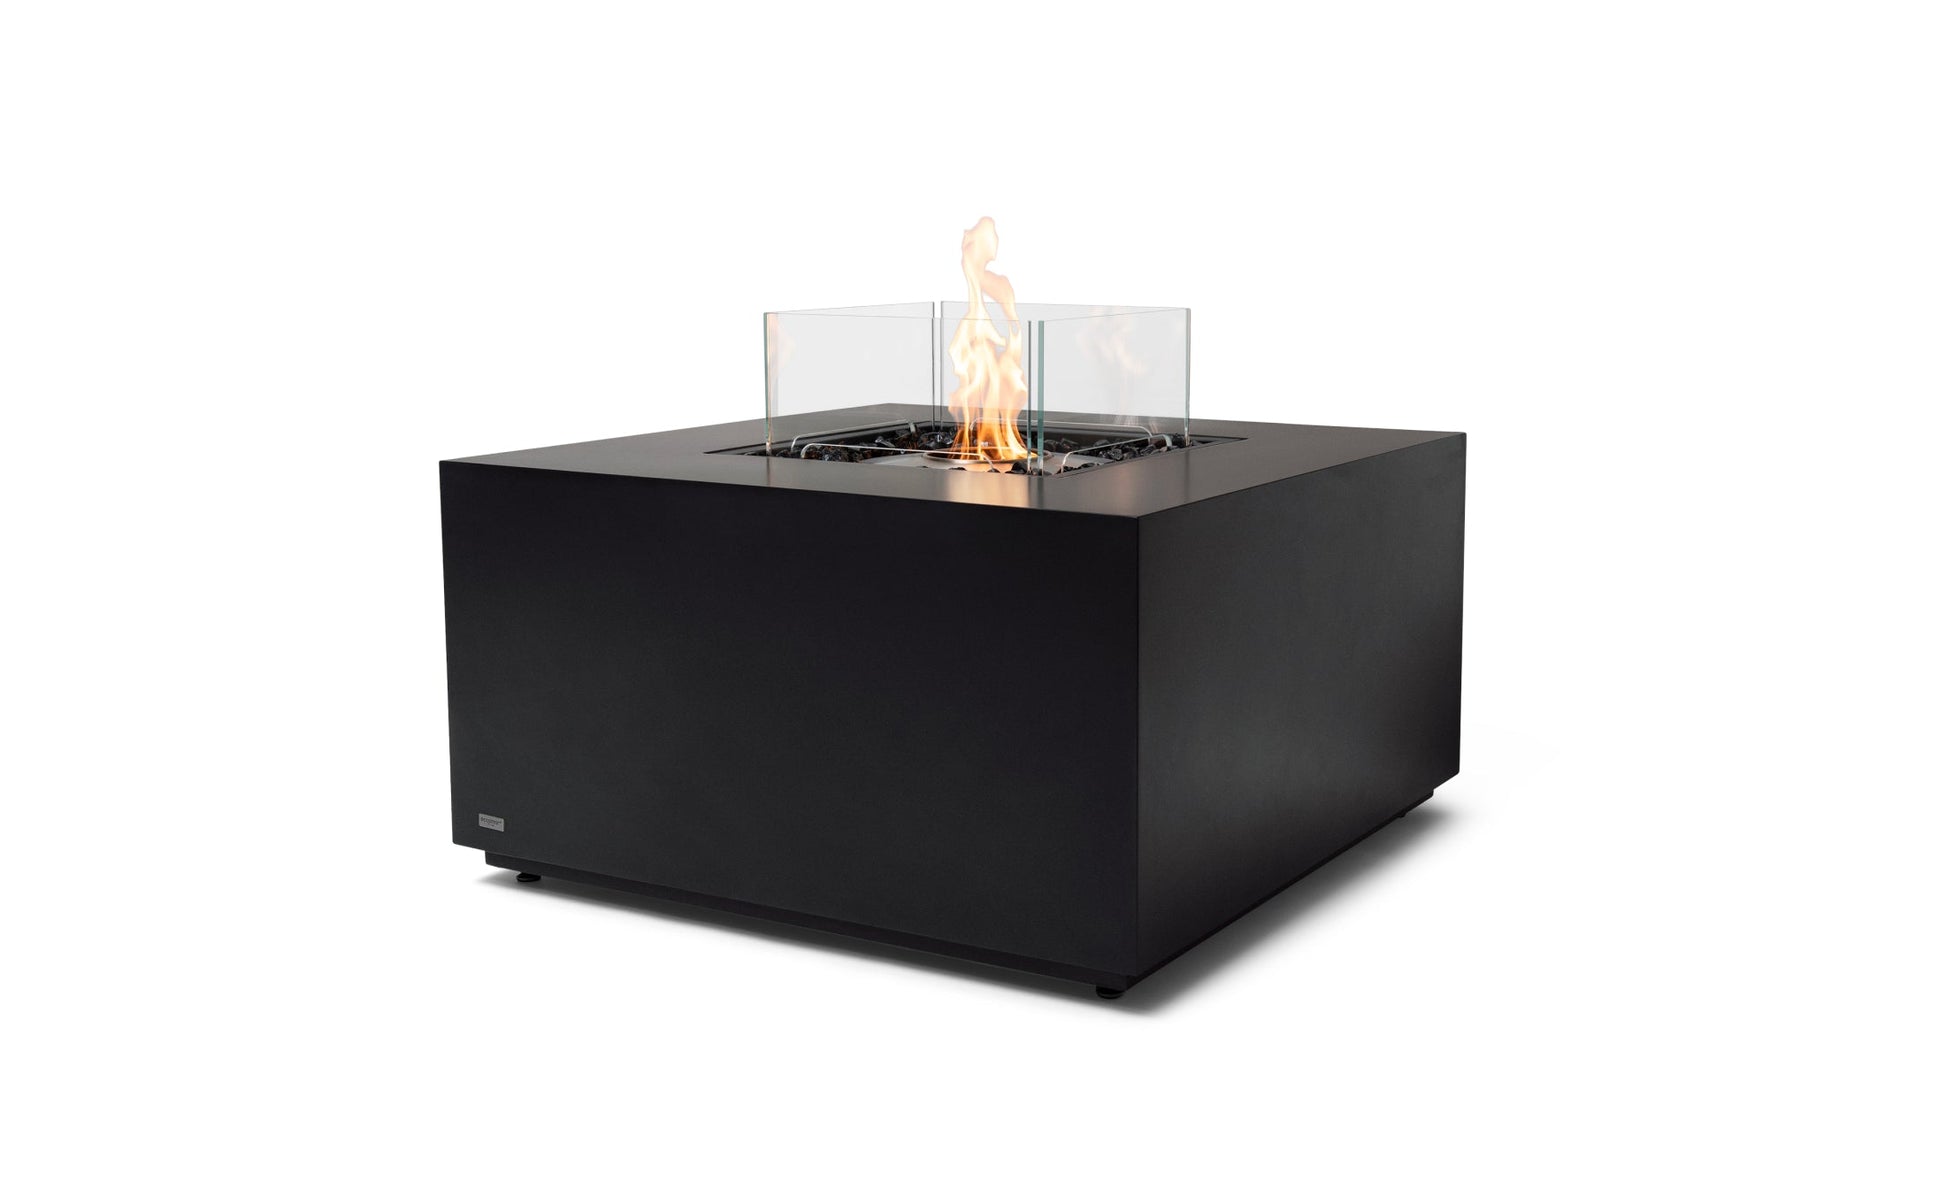 EcoSmart Fire CHASER 38" Graphite Indoor Fire Pit Table with Stainless Steel Burner by Mad Design Group